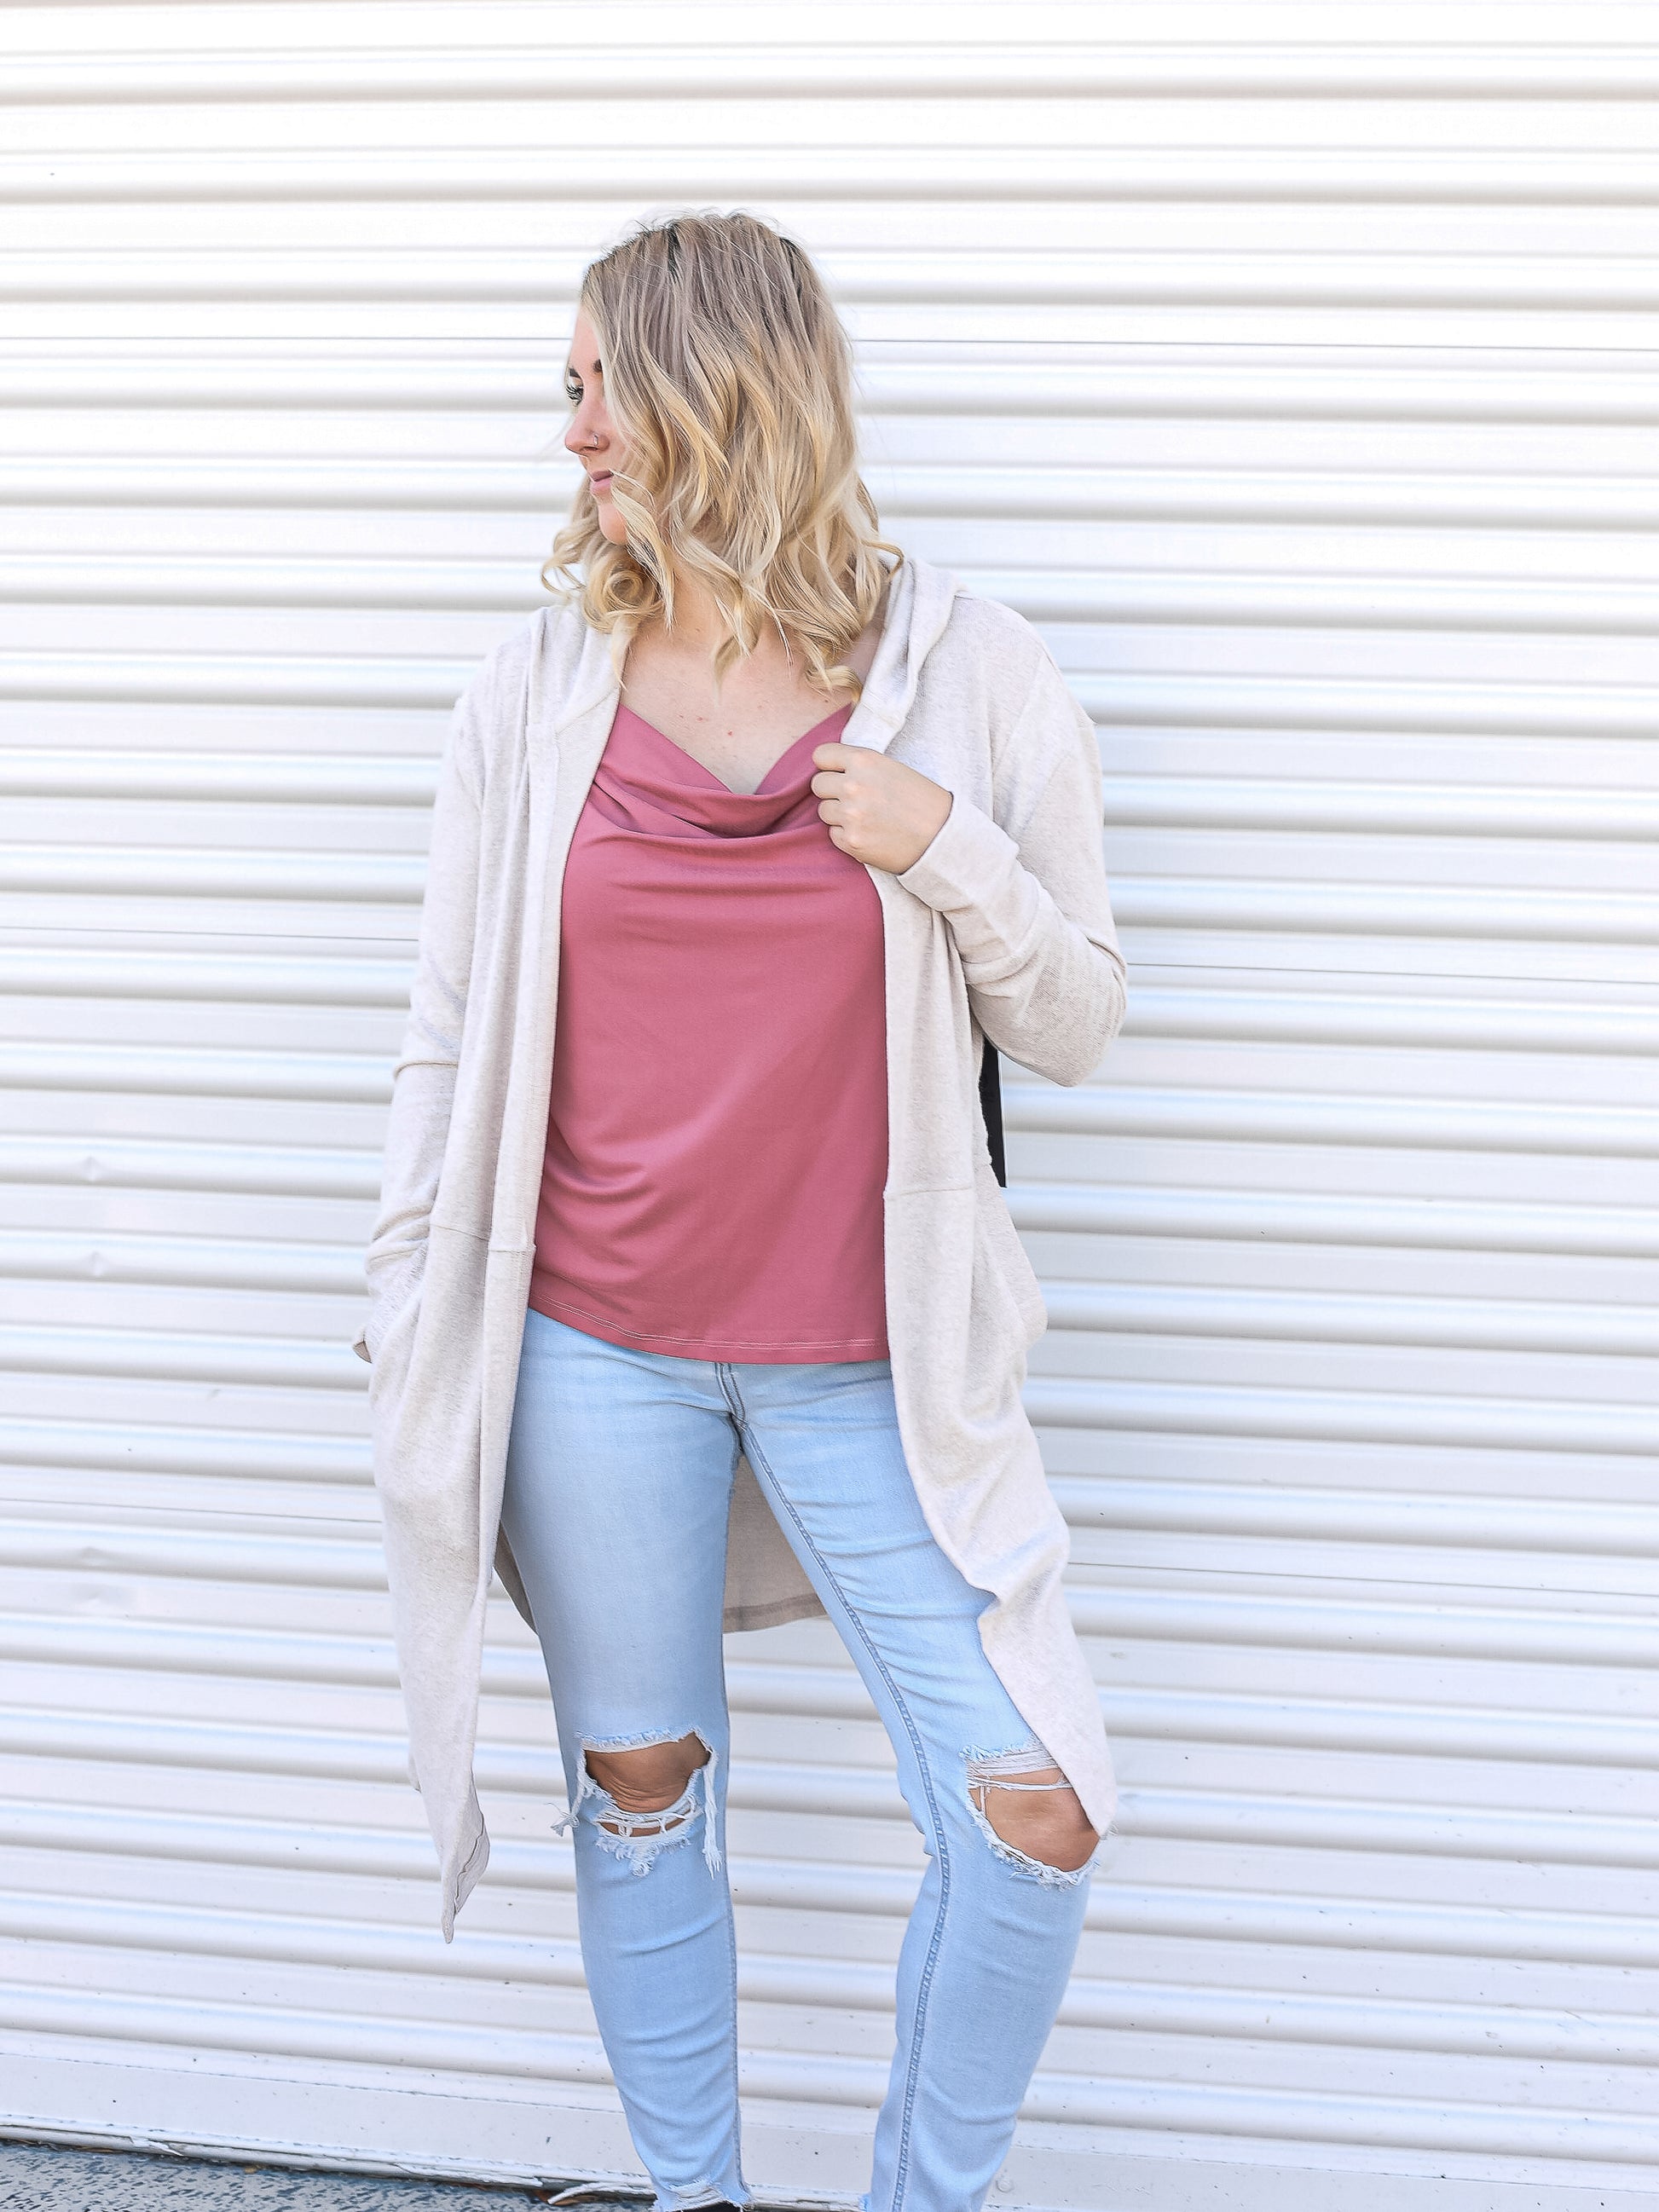 Mauve colored tank with cardigan over top